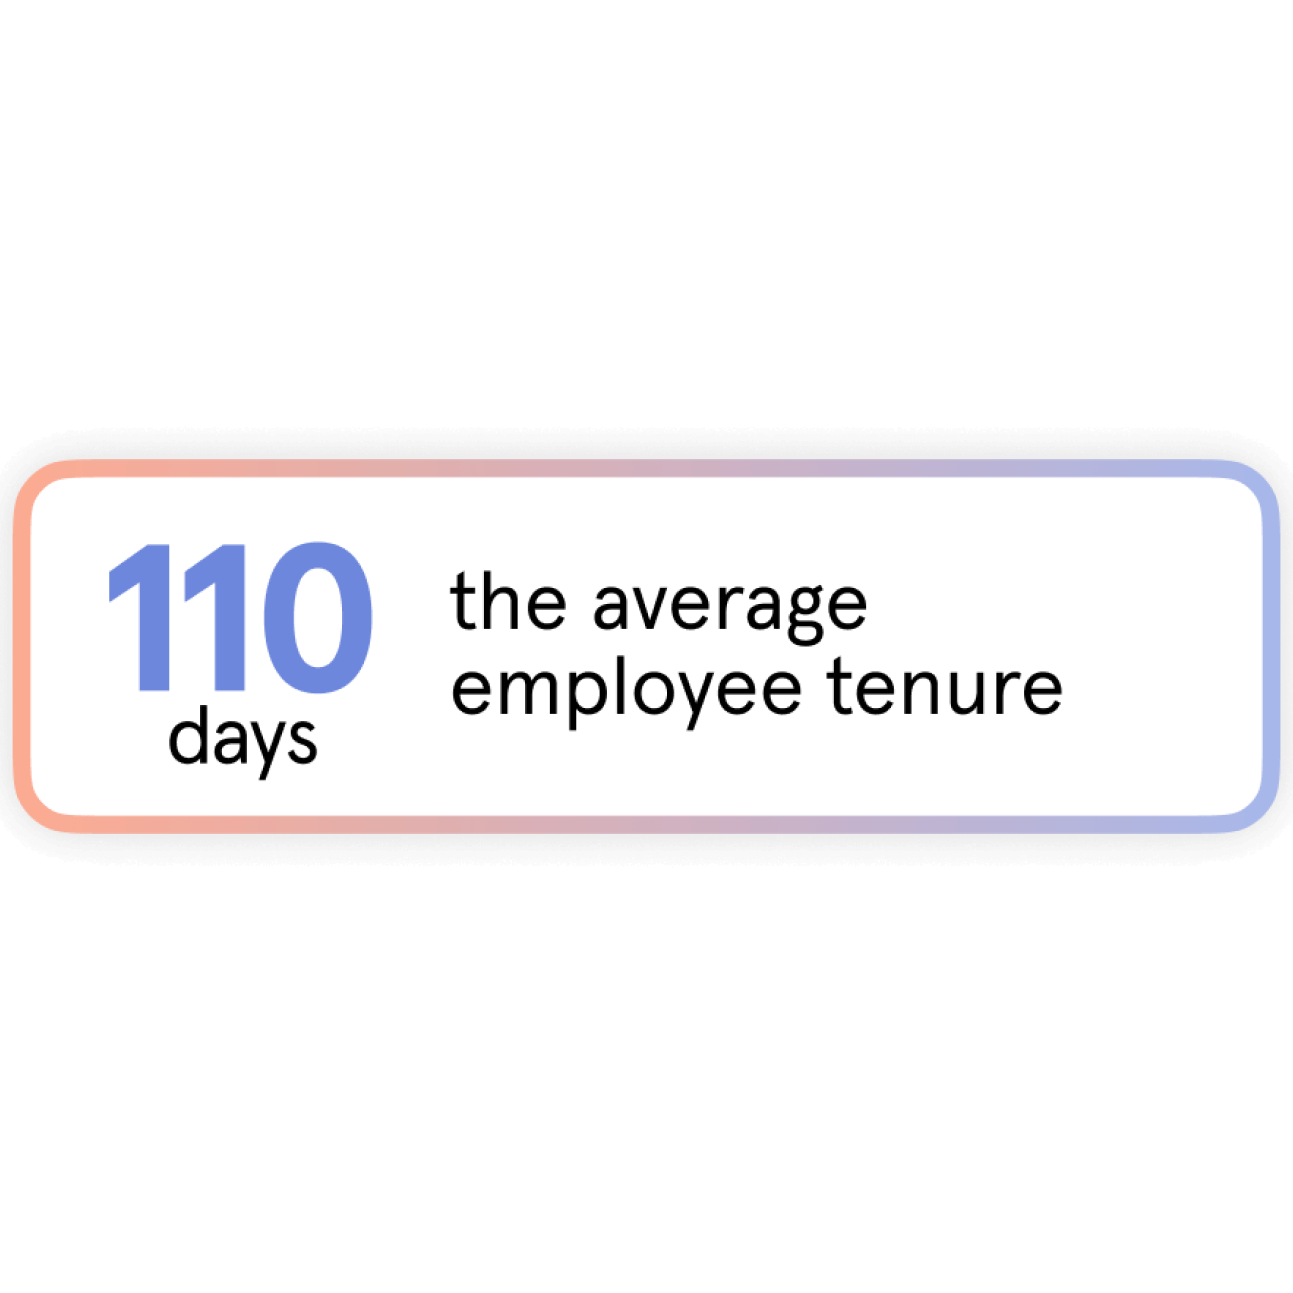 Stat: 110 days is the average employee tenure at a restaurant.